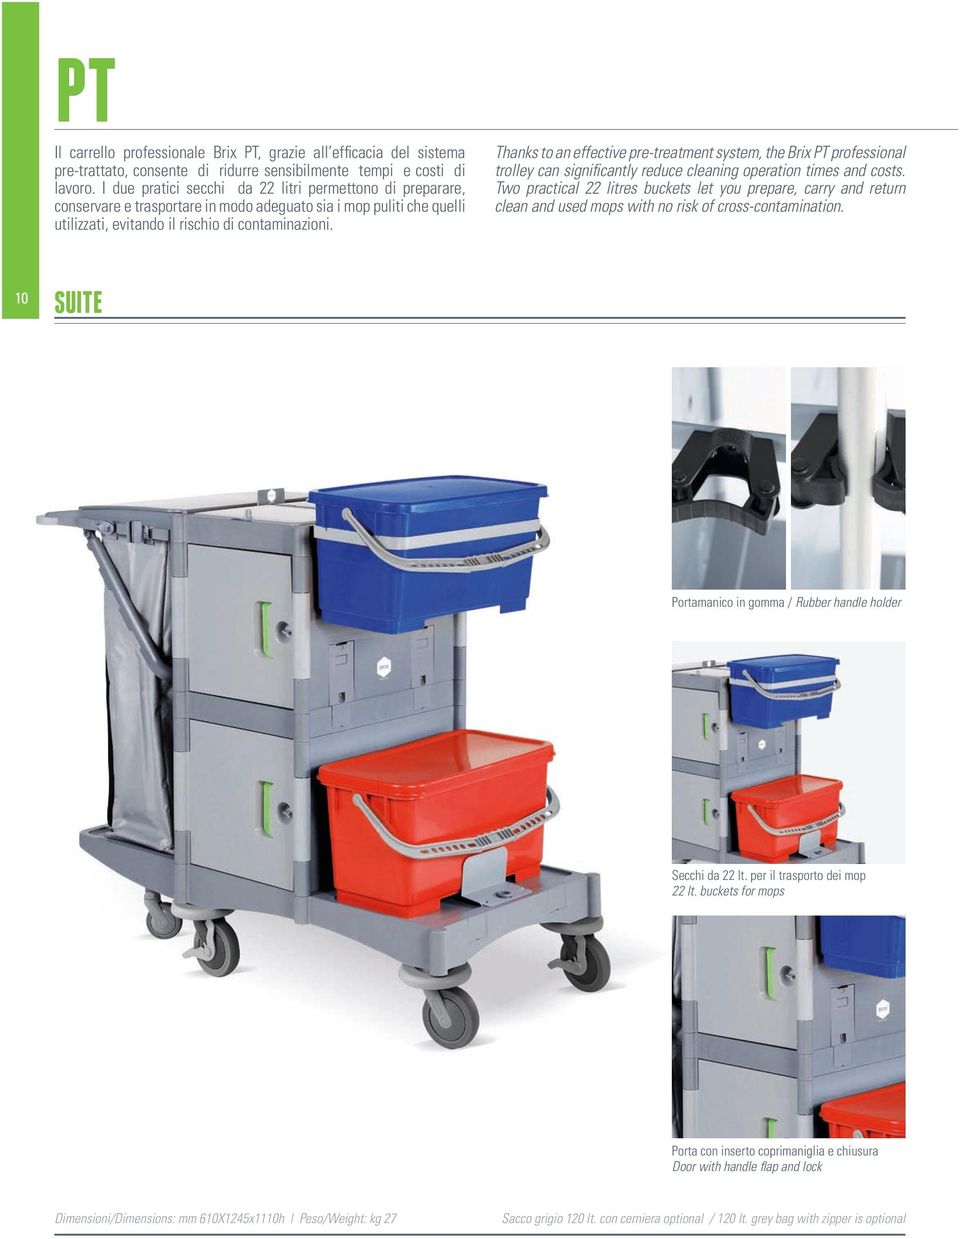 Thanks to an effective pre-treatment system, the Brix PT professional trolley can significantly reduce cleaning operation times and costs.